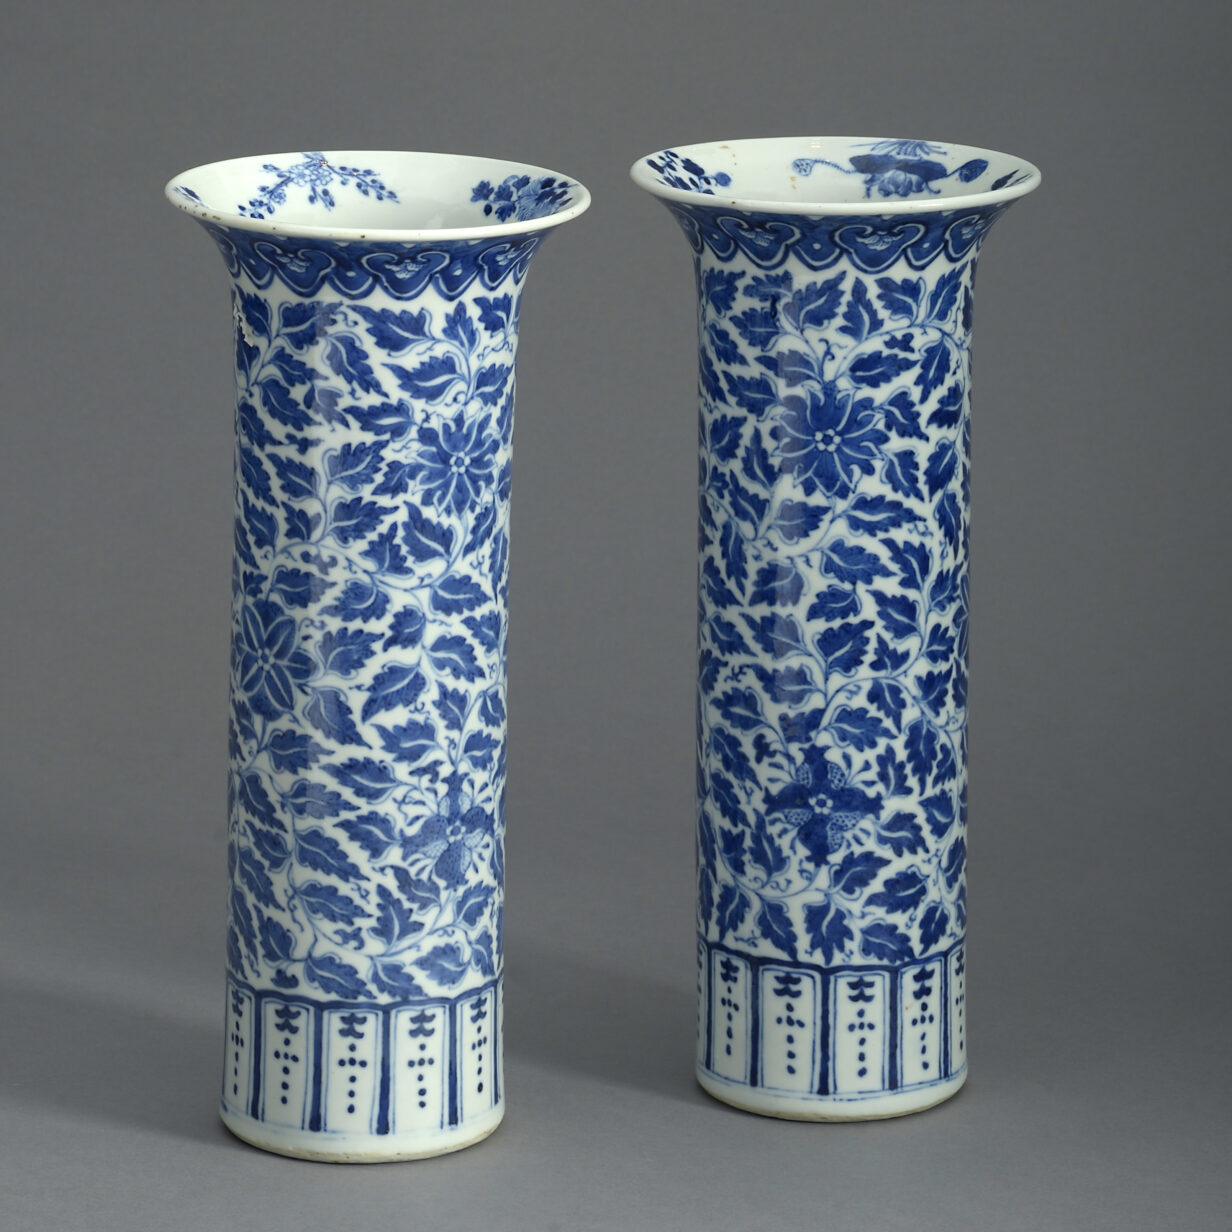 Pair of Blue and White Trumpet Vases